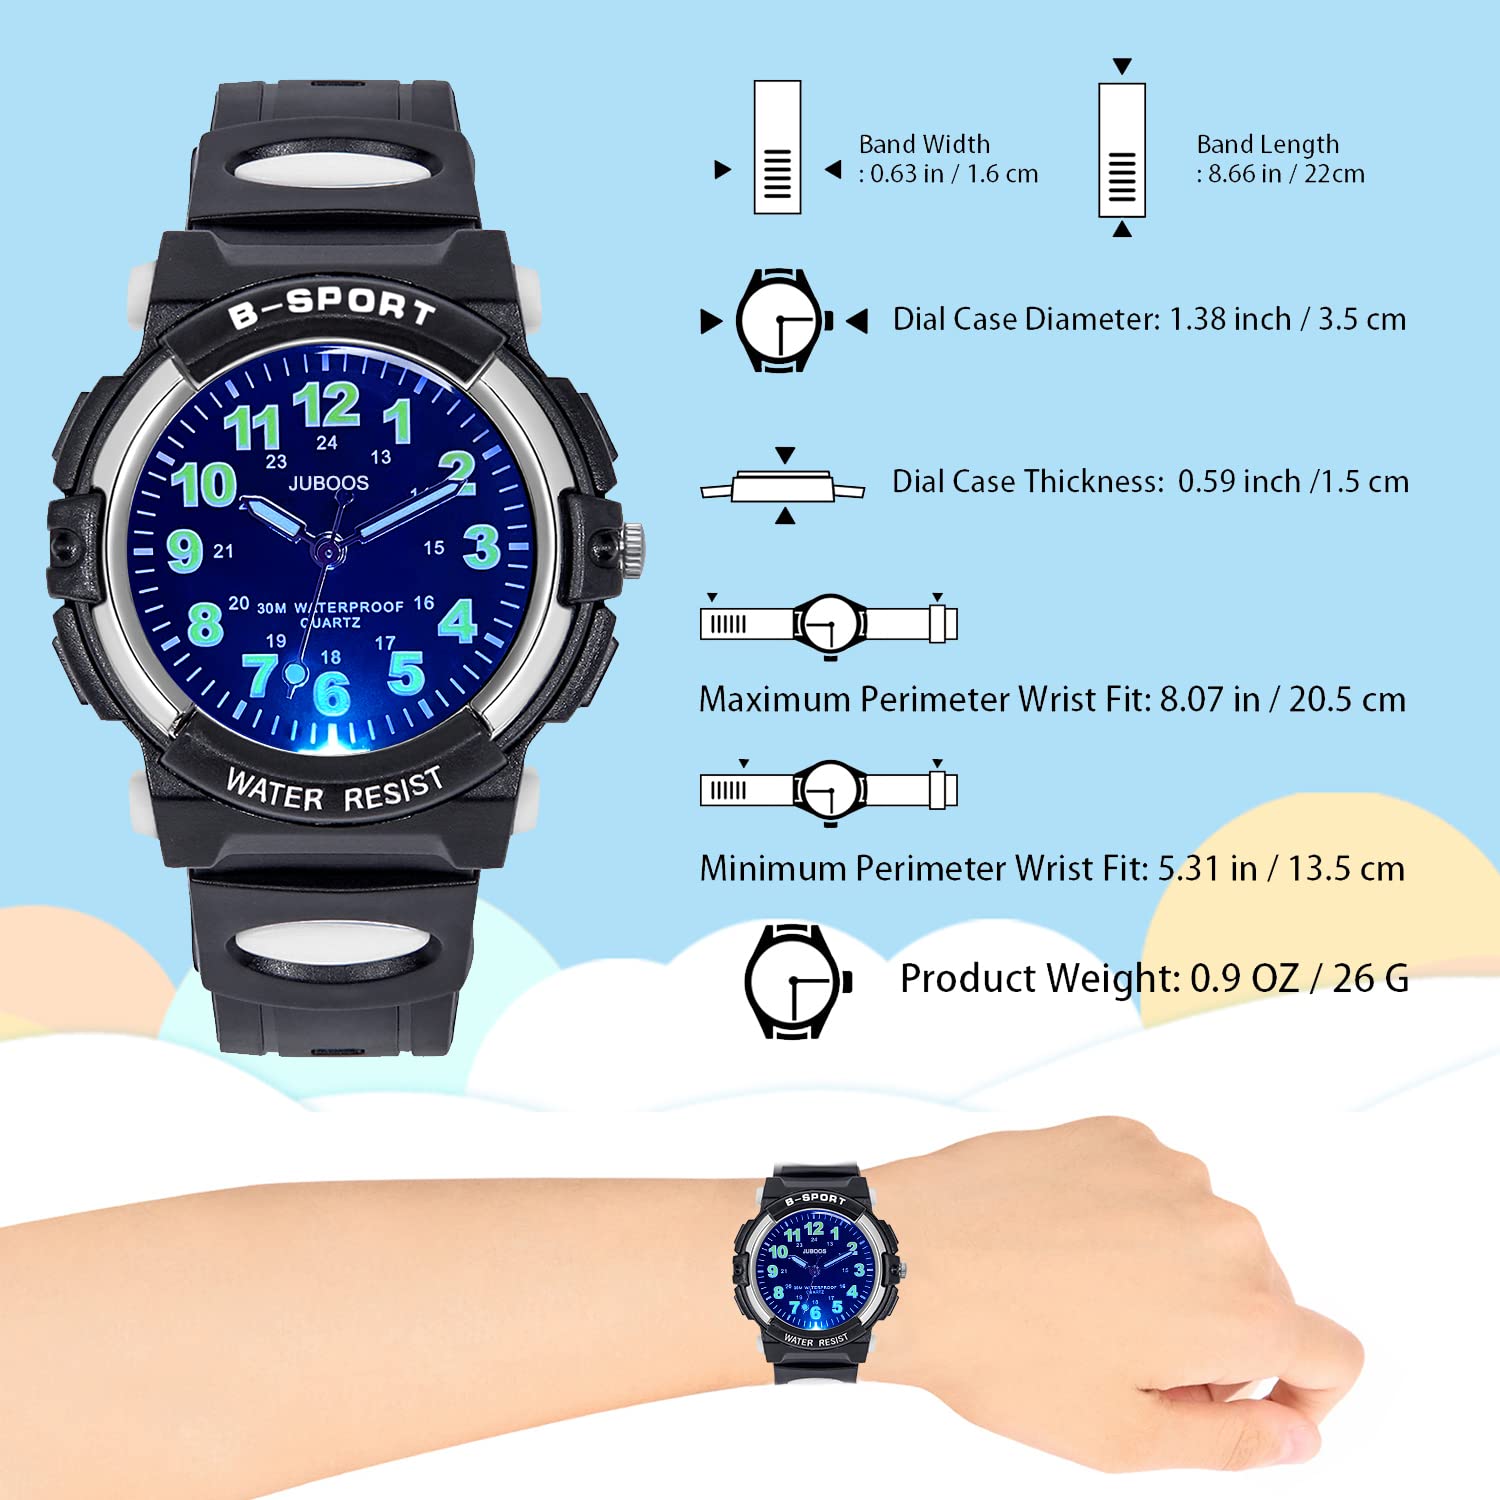 DTKID New Colorful Light Children's Watch Boys Girls,Kid Waterproof Analog Watch Soft Rubber Band Easy to Read Dial Time Lessons Wristwatch Children 5-18 Years Old